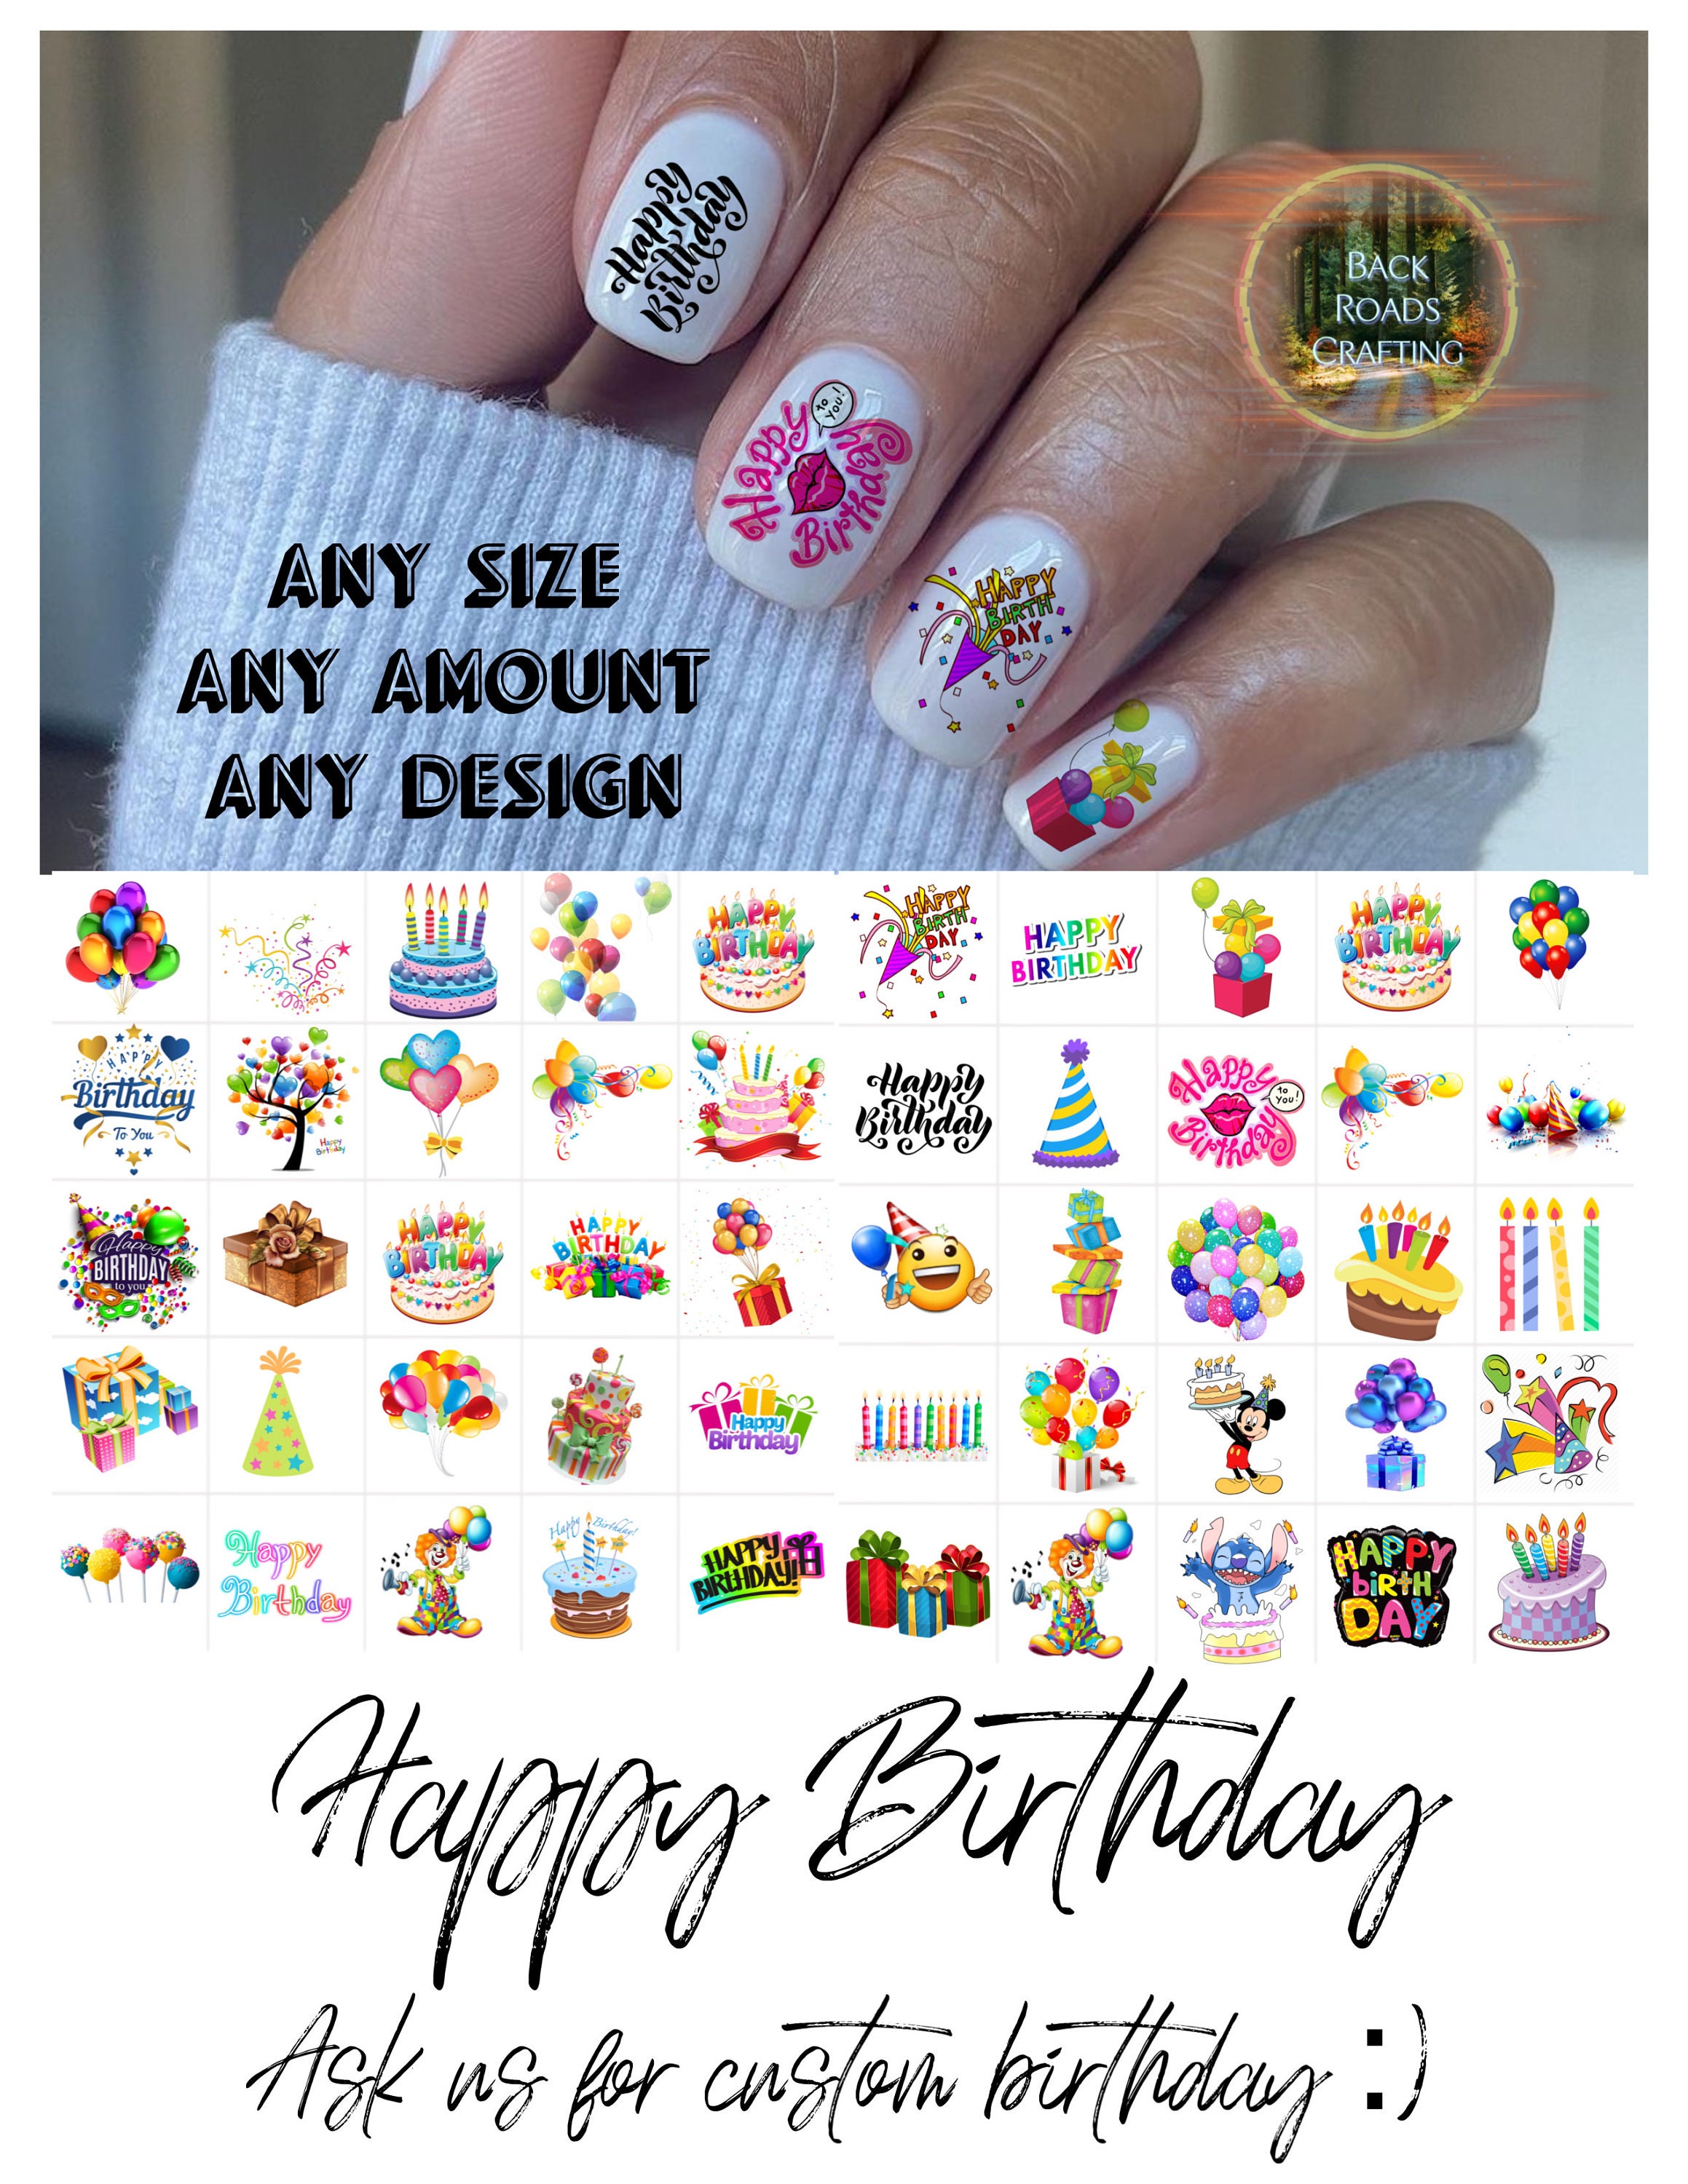 21 Fun Birthday Nails To Wear On Your Special Day | Darcy